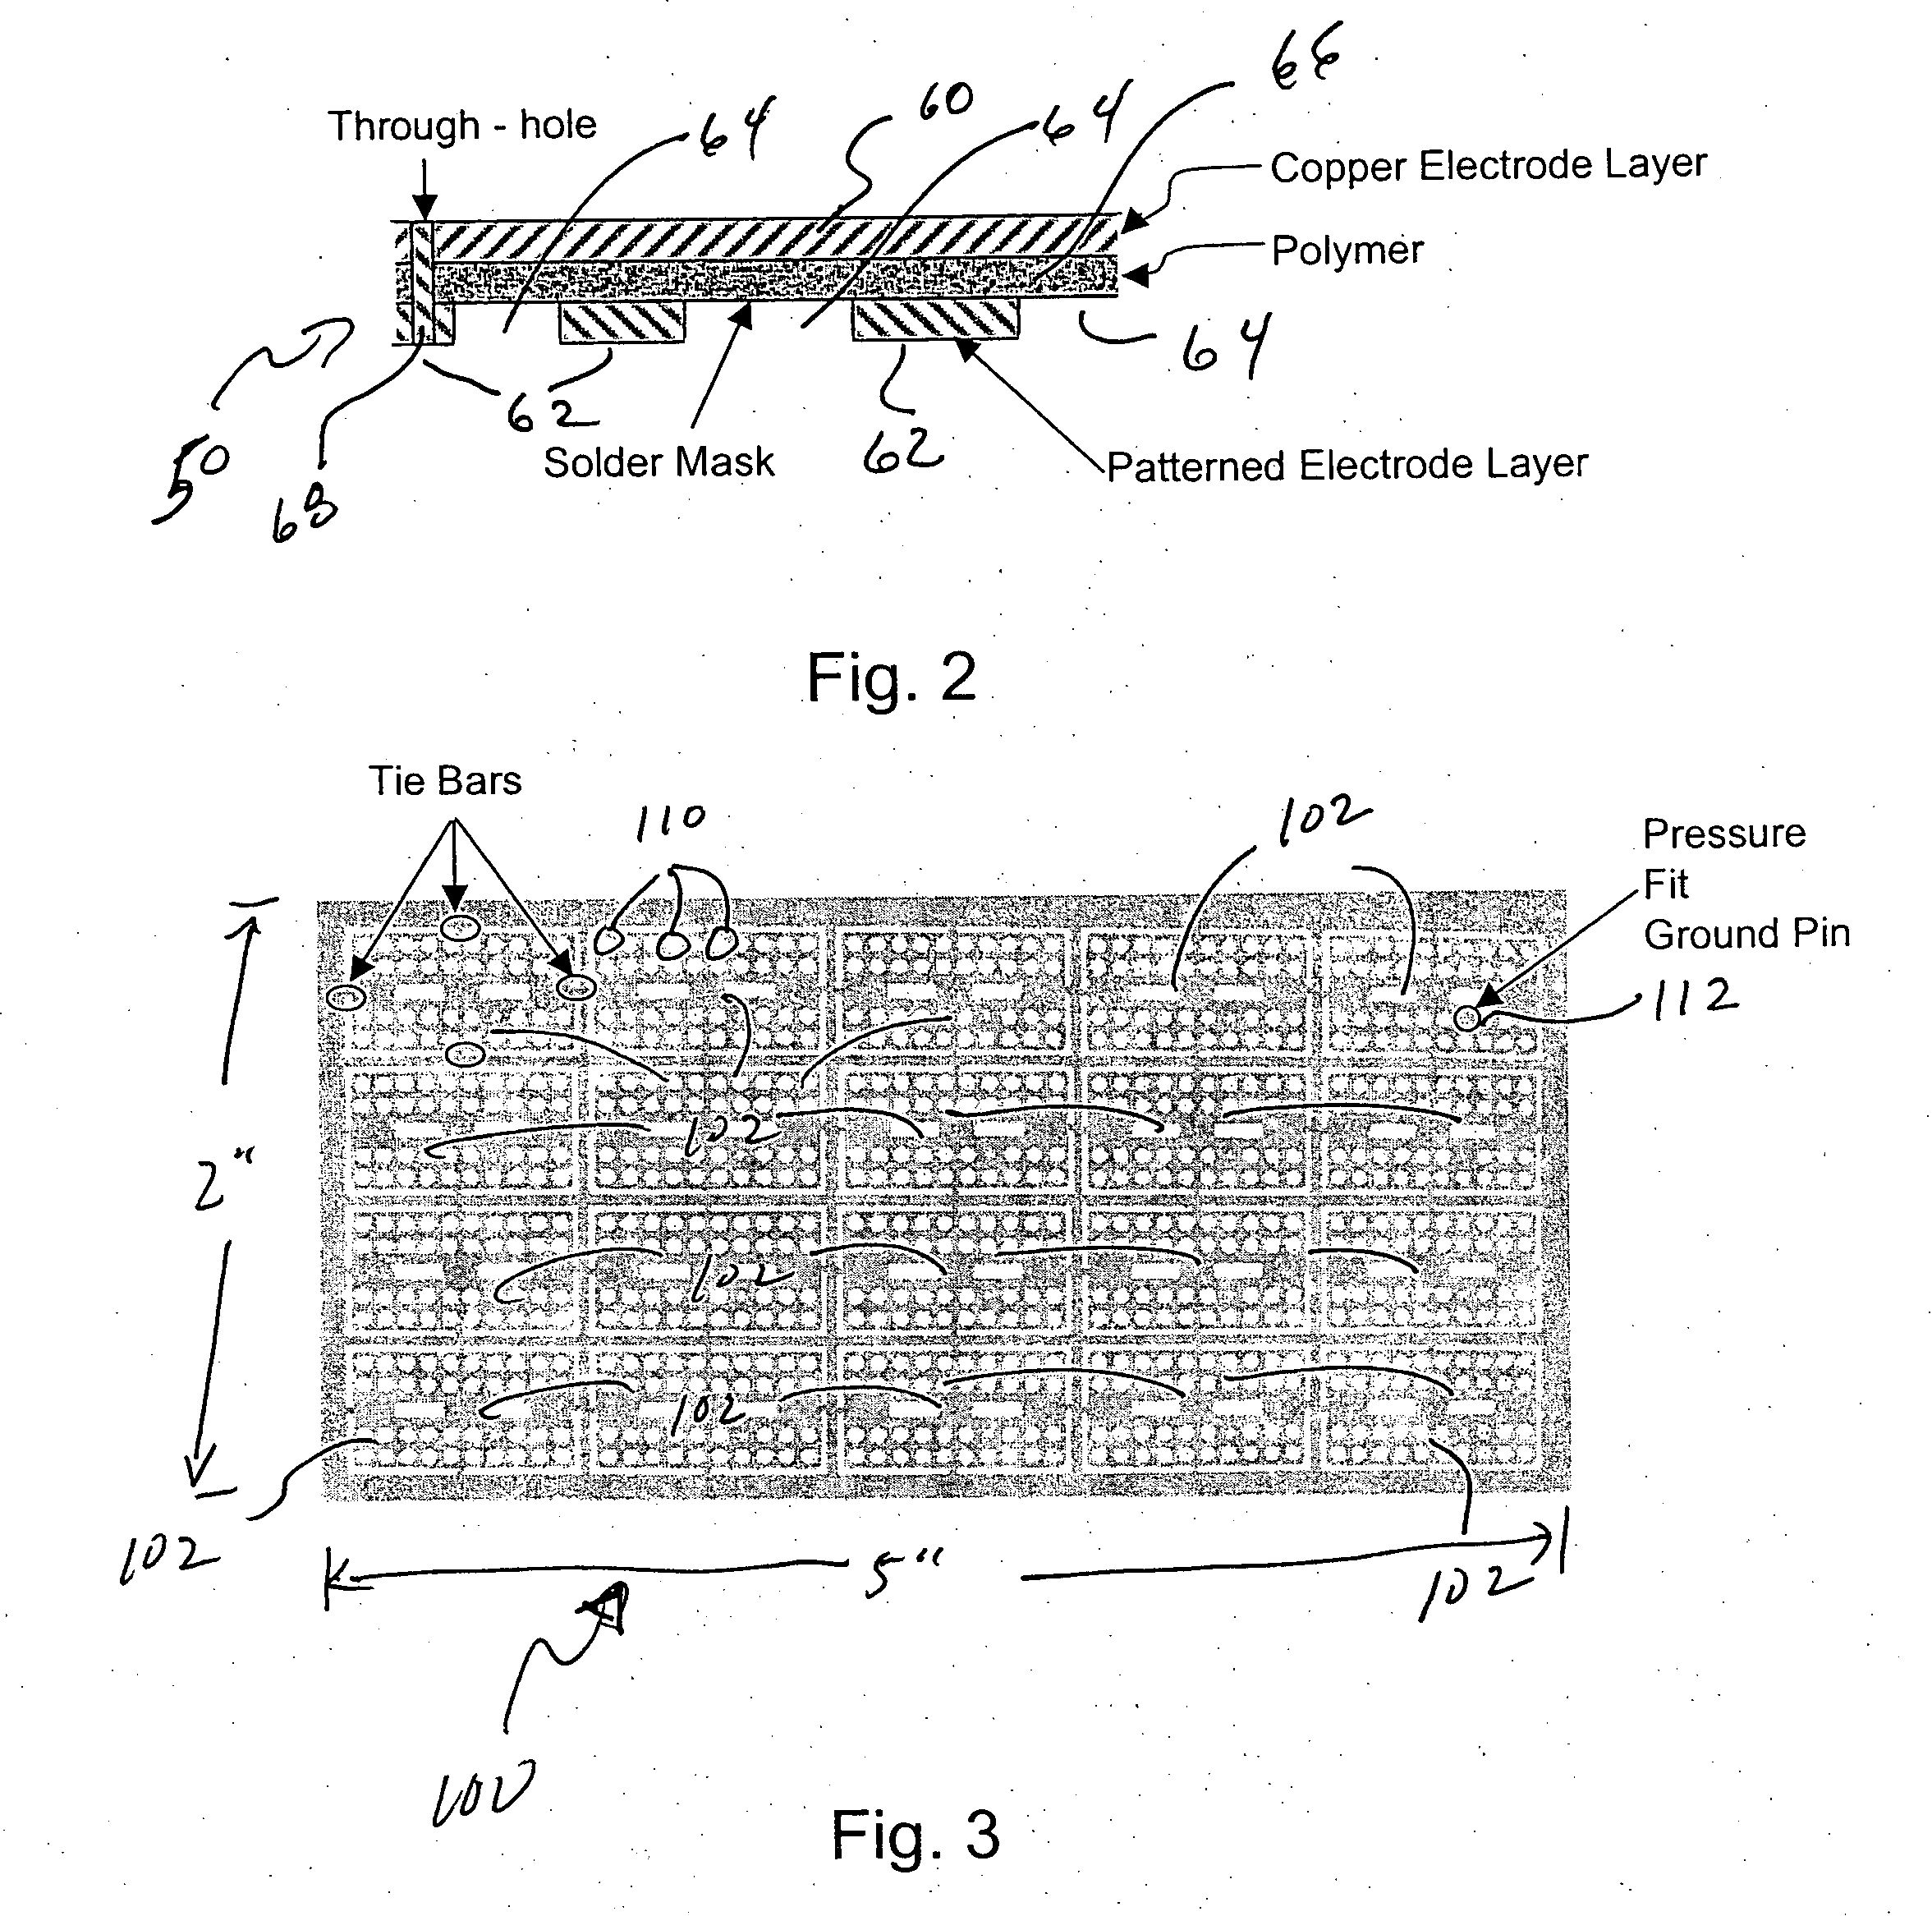 ESD protection devices and methods of making same using standard manufacturing processes